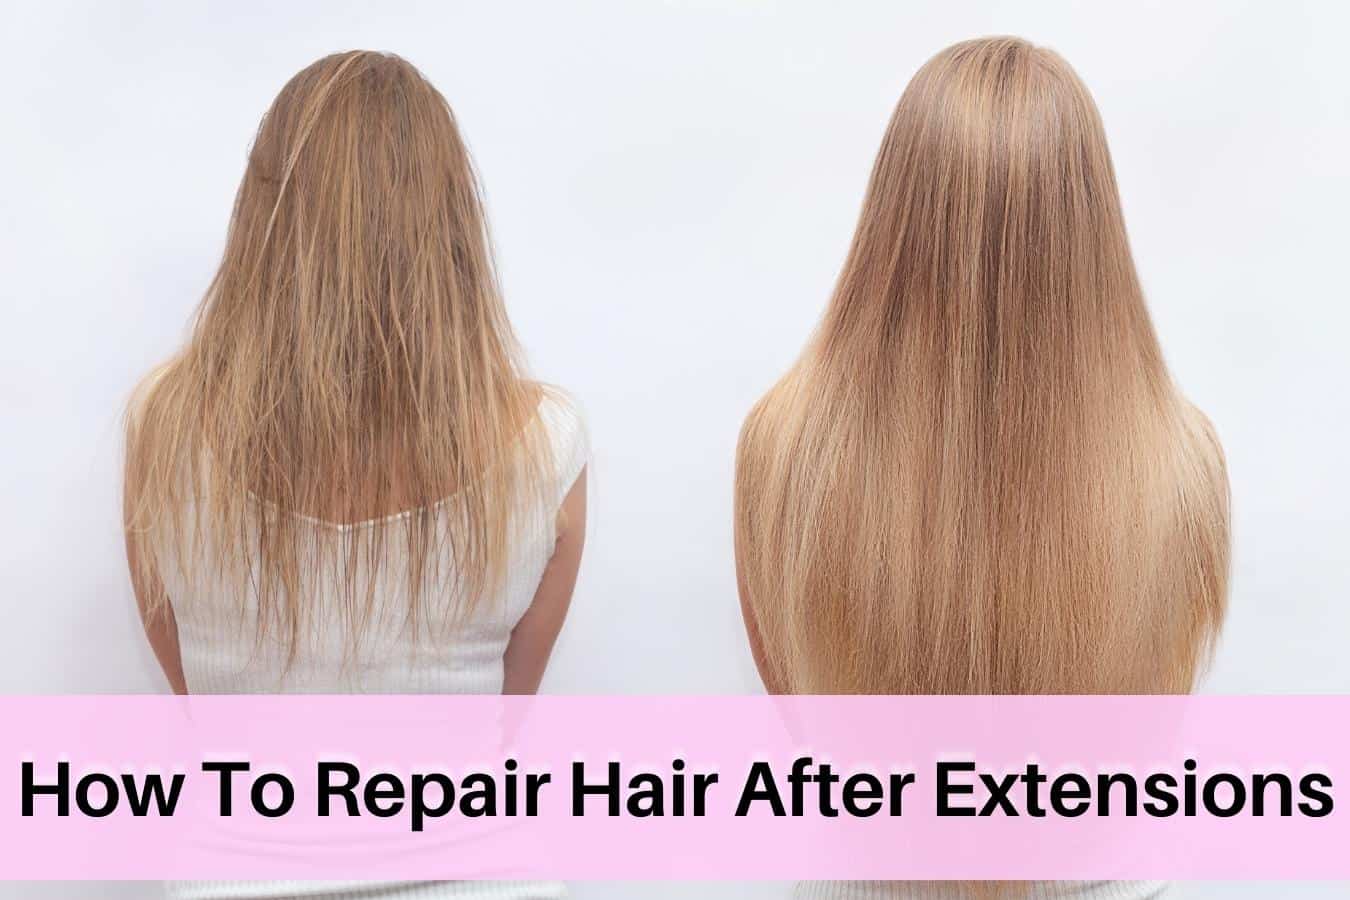 How To Repair Your Hair After Extensions